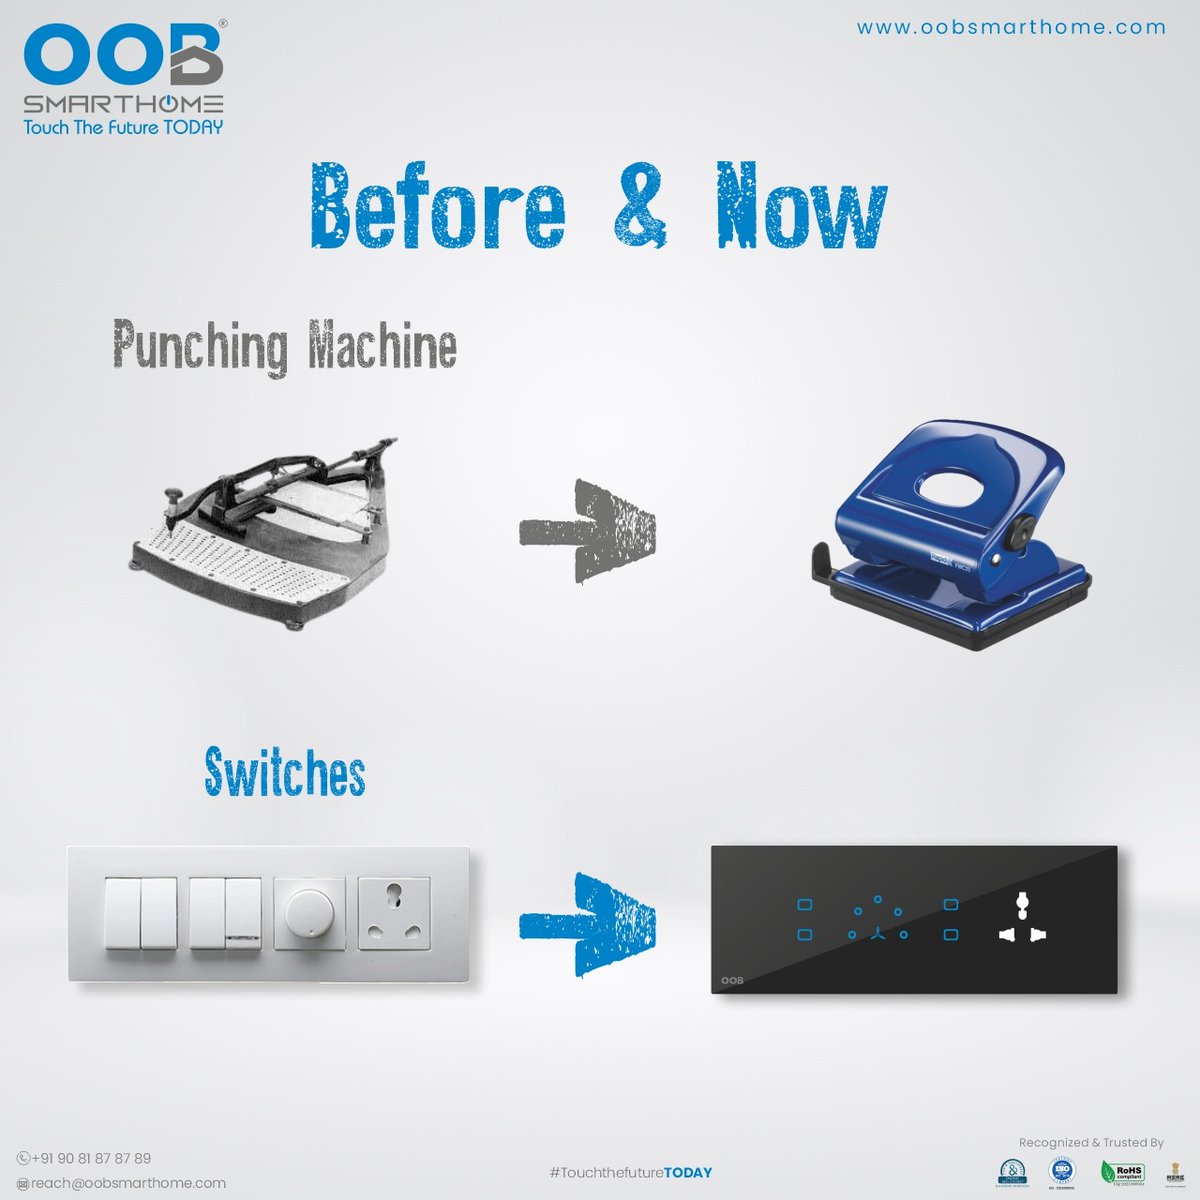 #OOBSmarthome – Before & now - #Punchingmachine
.
for quick inquiry call on: +91 9081 8787 89
.
.
#Punchingmachine #connectedhome #SmartHomes #smarttechnology #innovation #luxuryhomes #smarthomesystem #homeautomation #touchswitch #TouchSwitches #DesignerTouchSwitches #HomeDecor